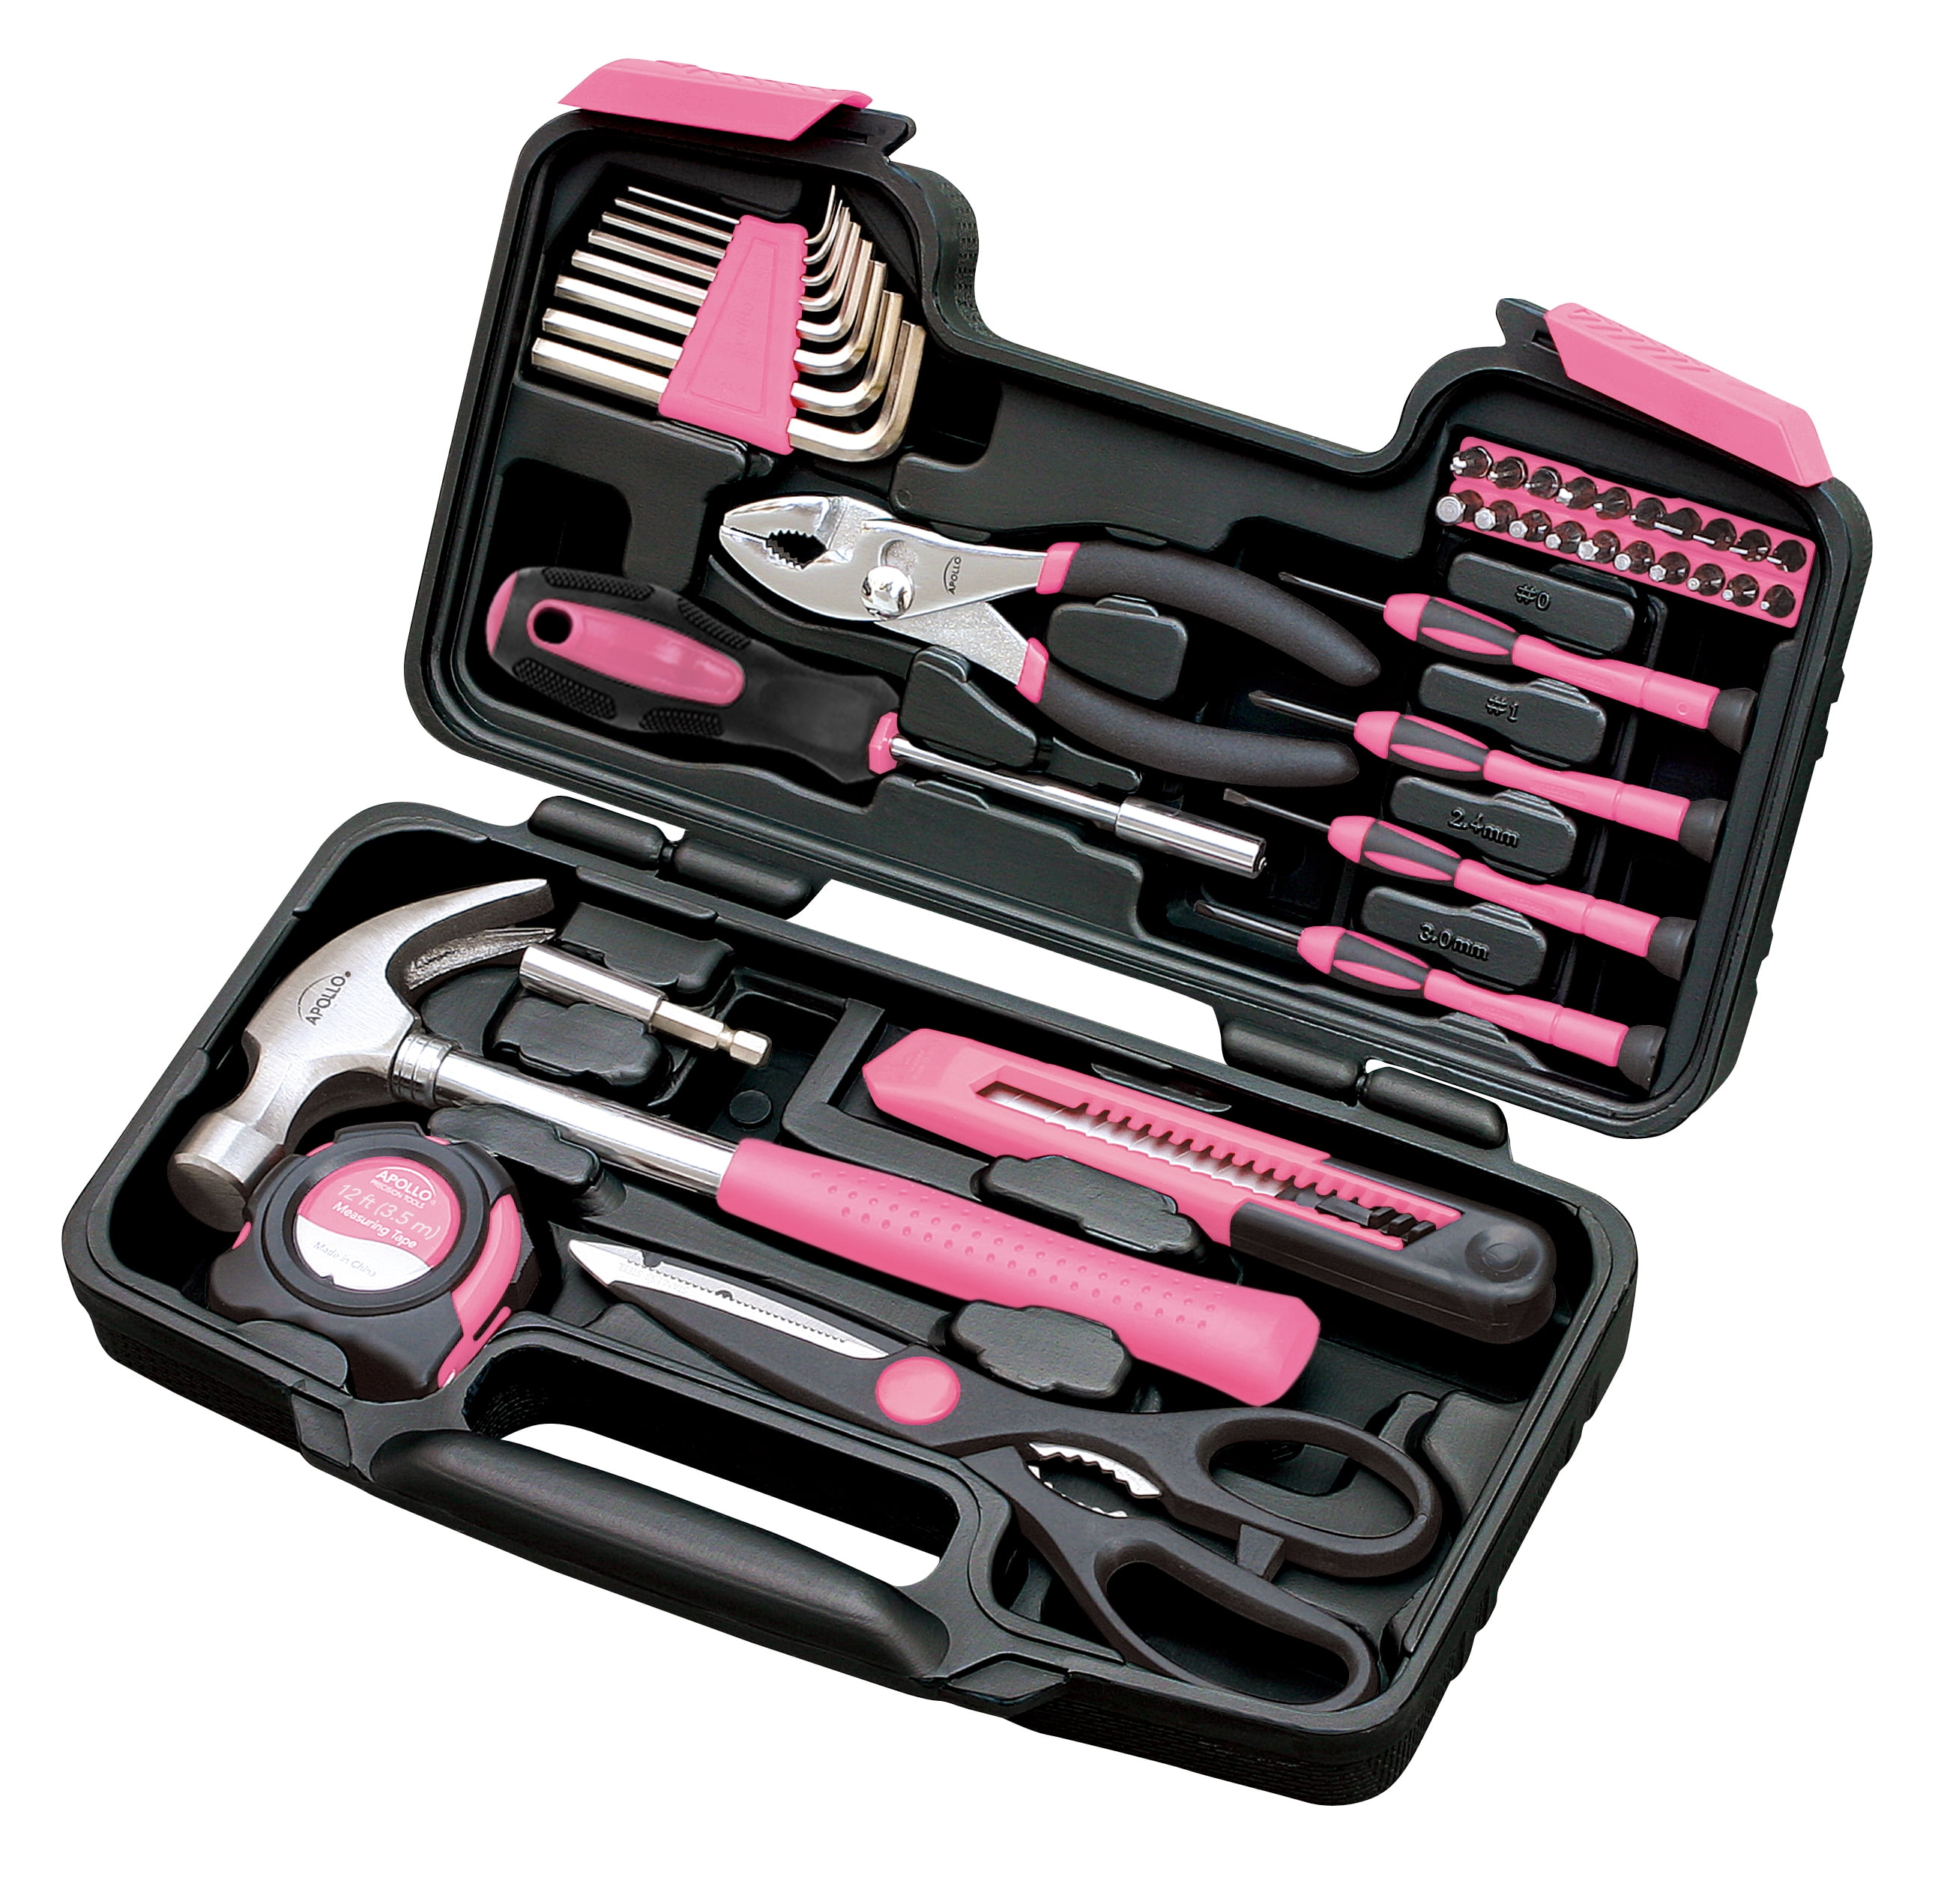 Stalwart Home Improvement Tool Kit – 15-Piece Tool Set with Hammer 